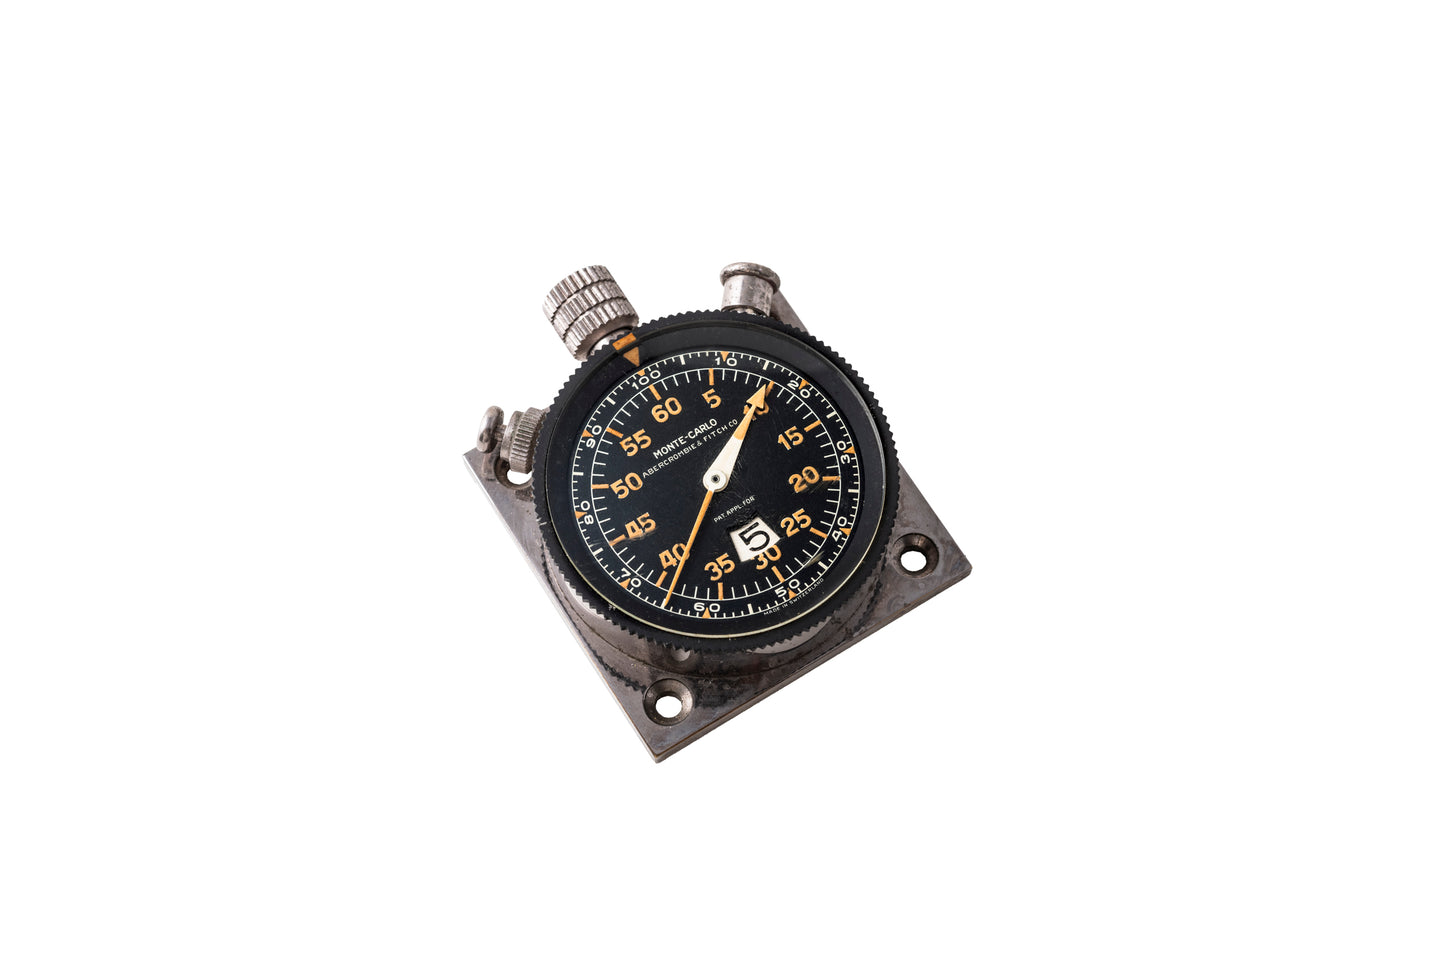 Heuer Monte Carlo Dash Timer for Abercrombie & Fitch